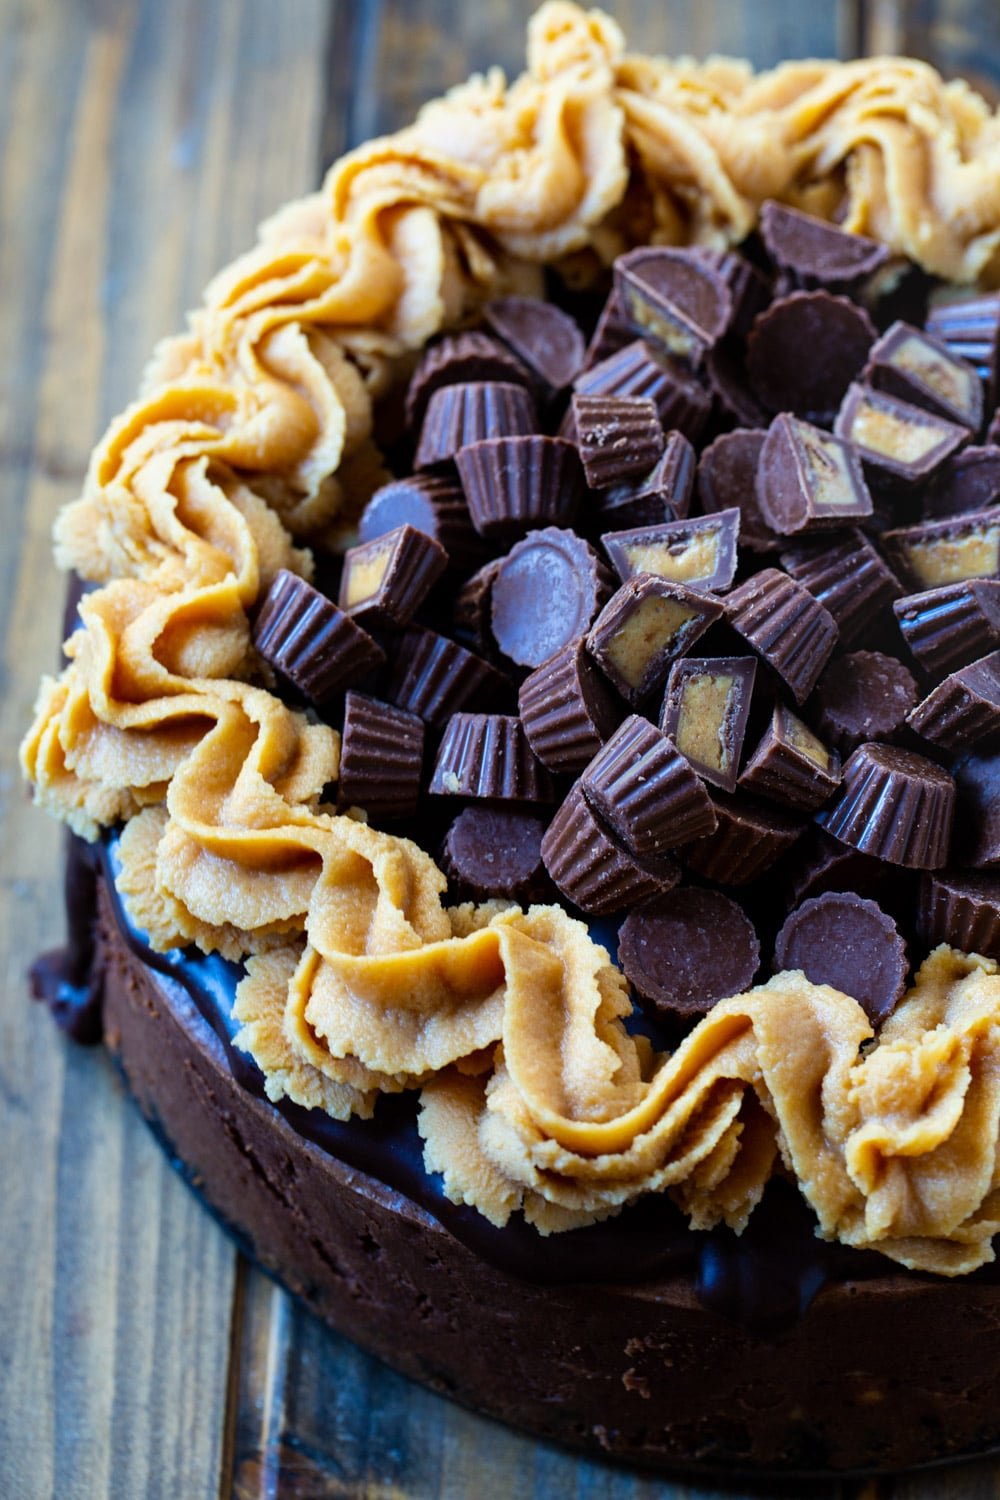 Whole, uncut Chocolate Peanut Butter Cup Cheesecake.